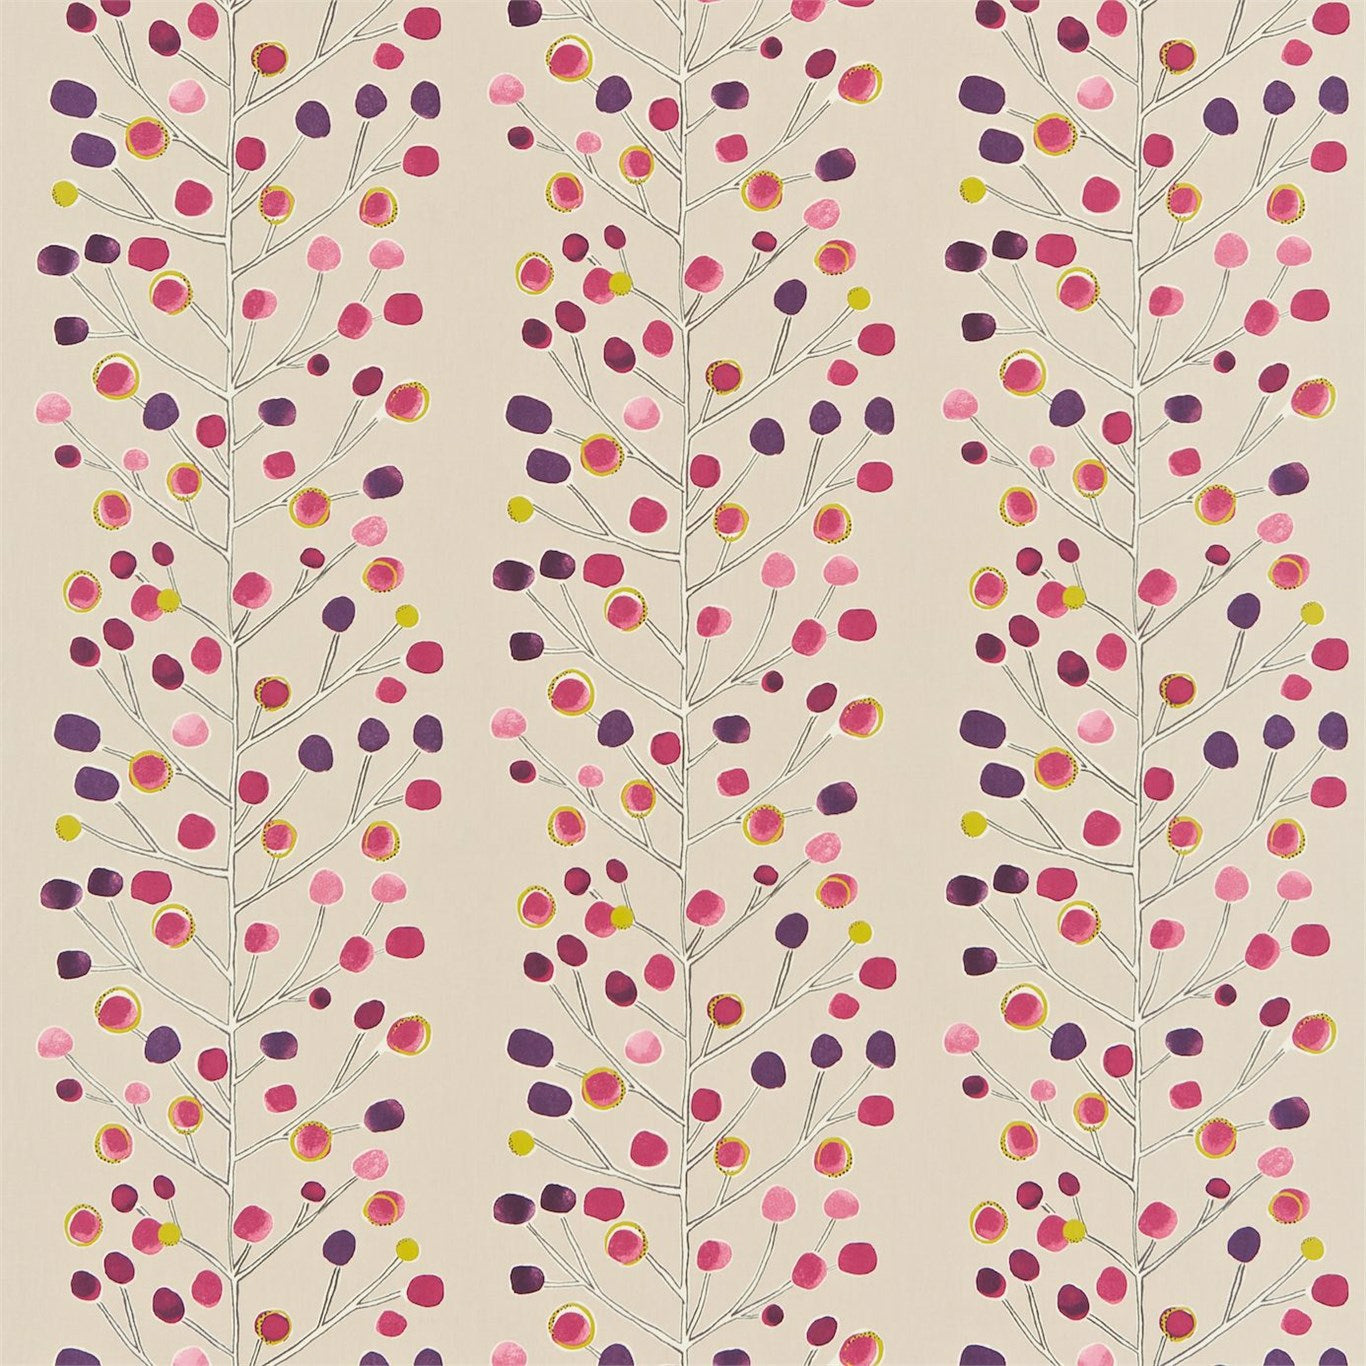 Berry Tree Fabric by Scion - NMEL120053 - Mink Plum Berry And Lime